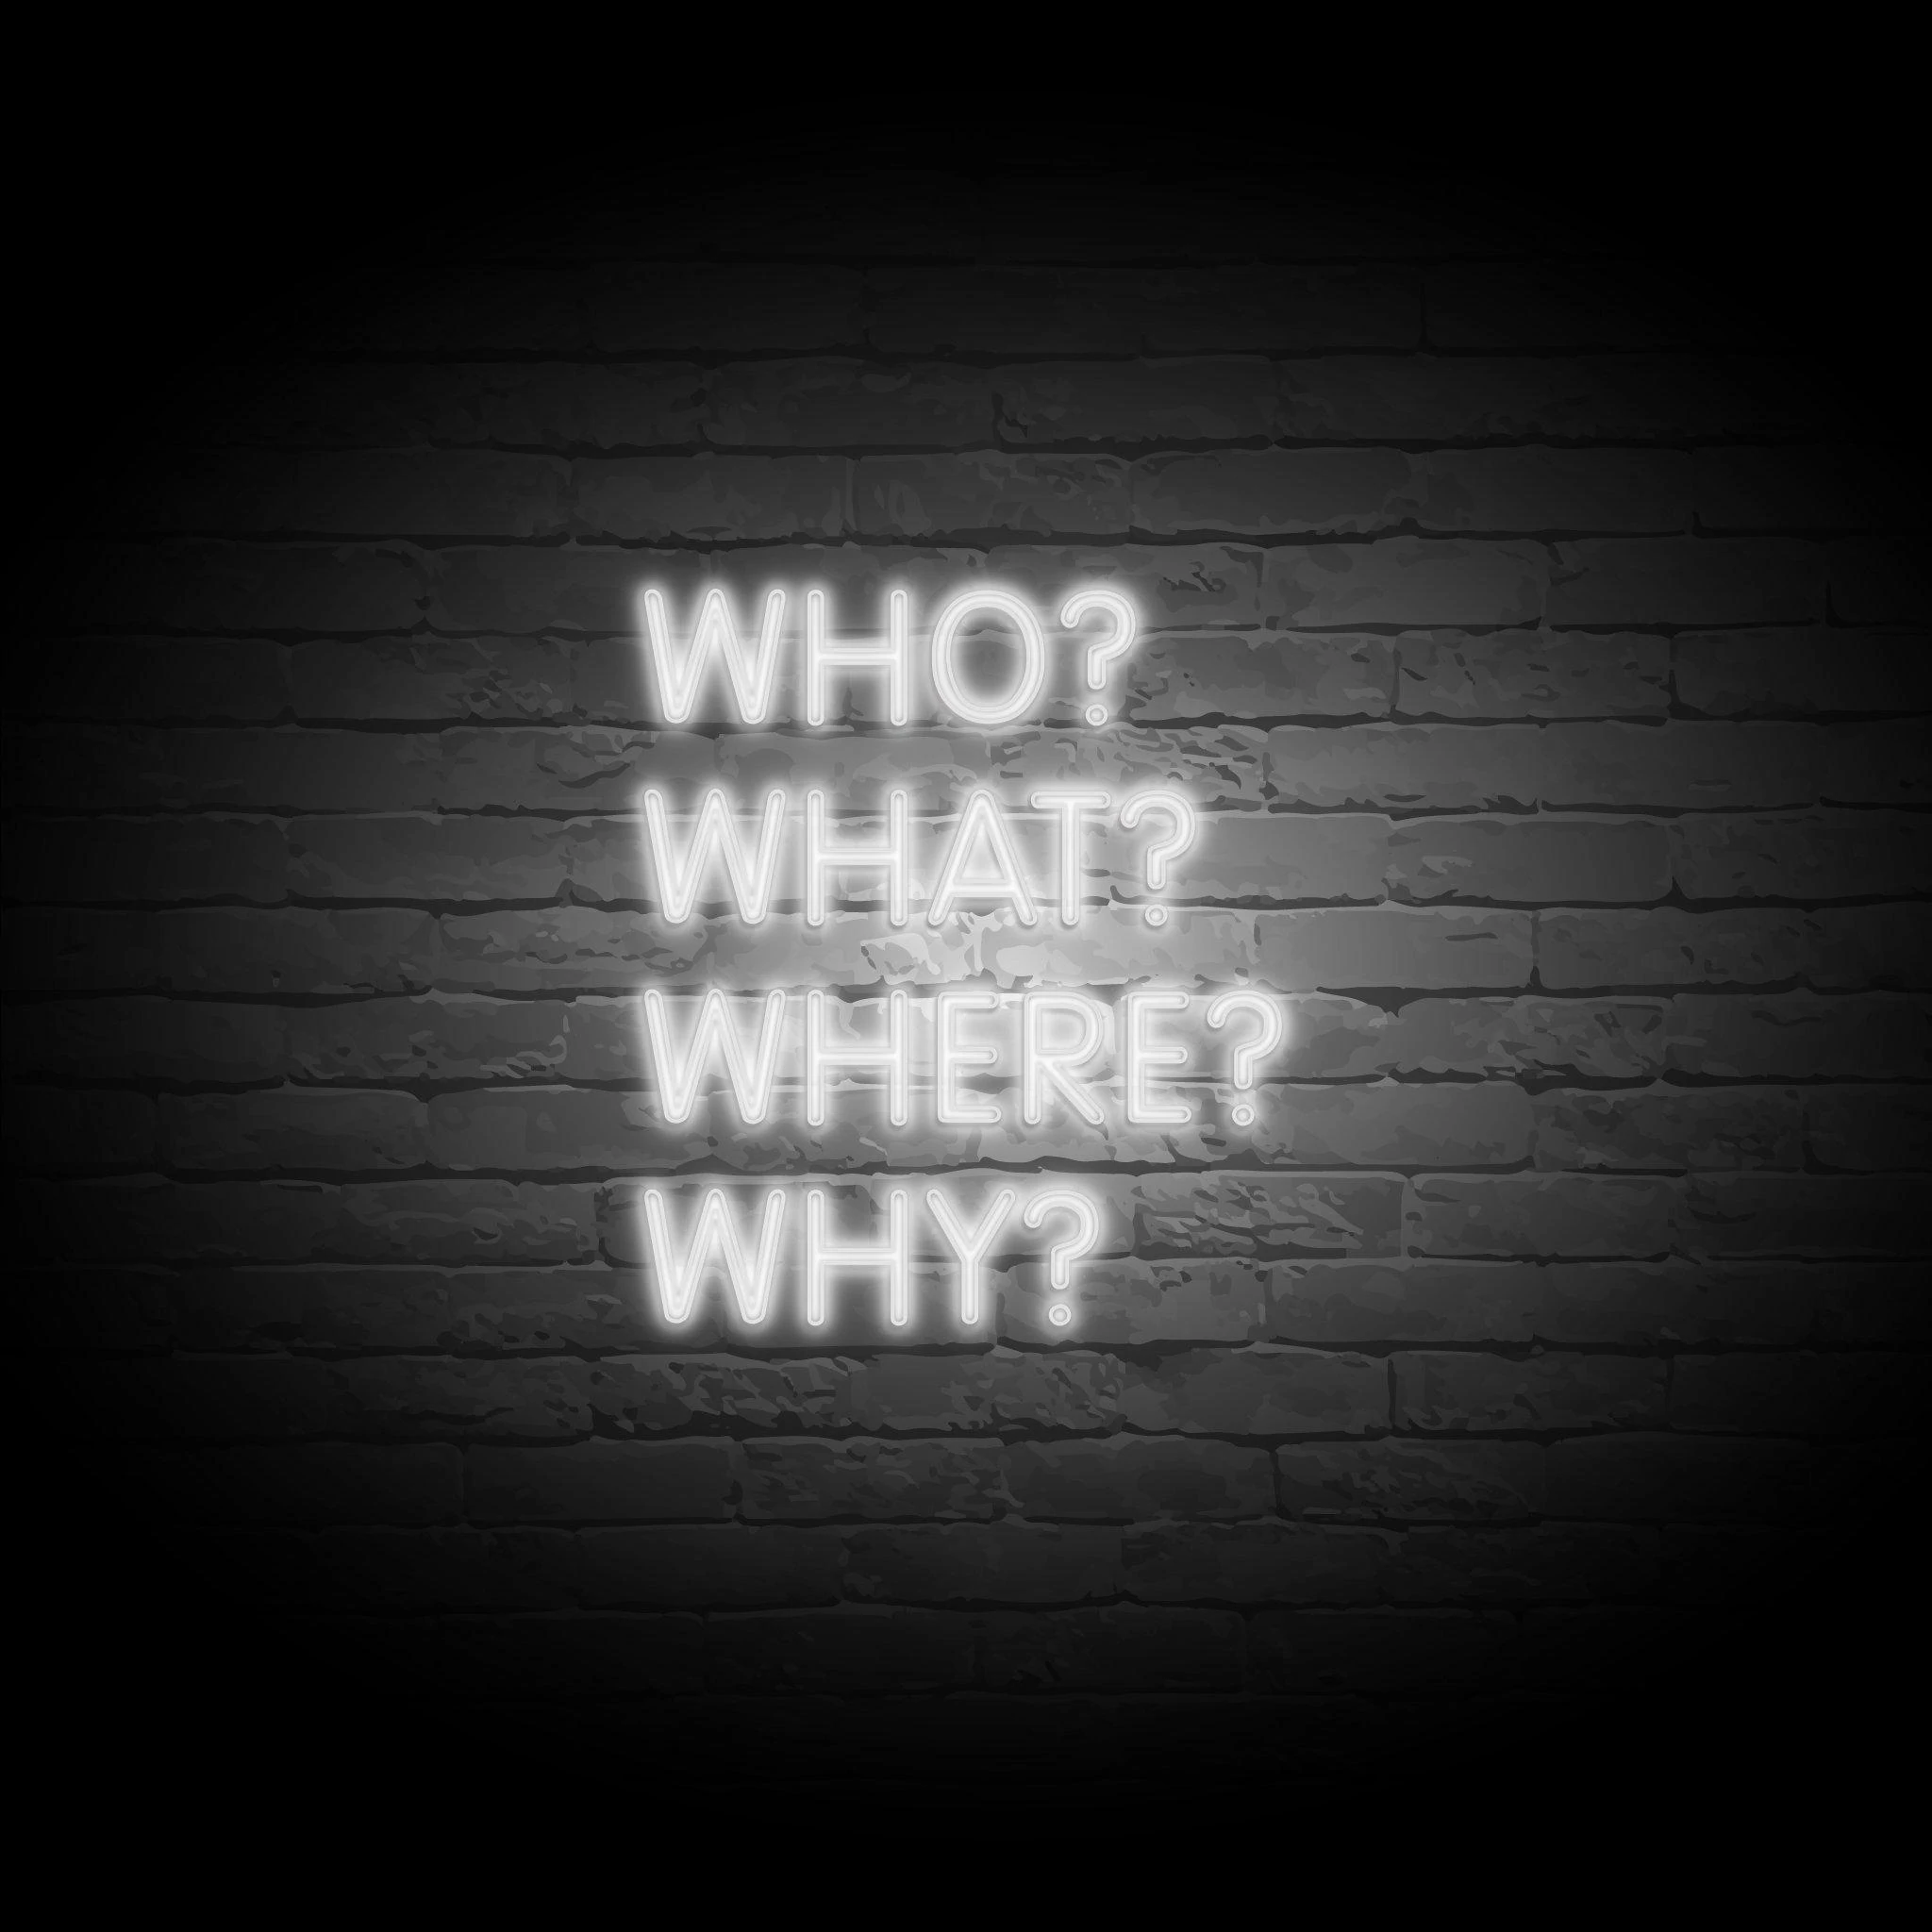 'WHO? WHAT? WHERE? WHY?' NEON SIGN